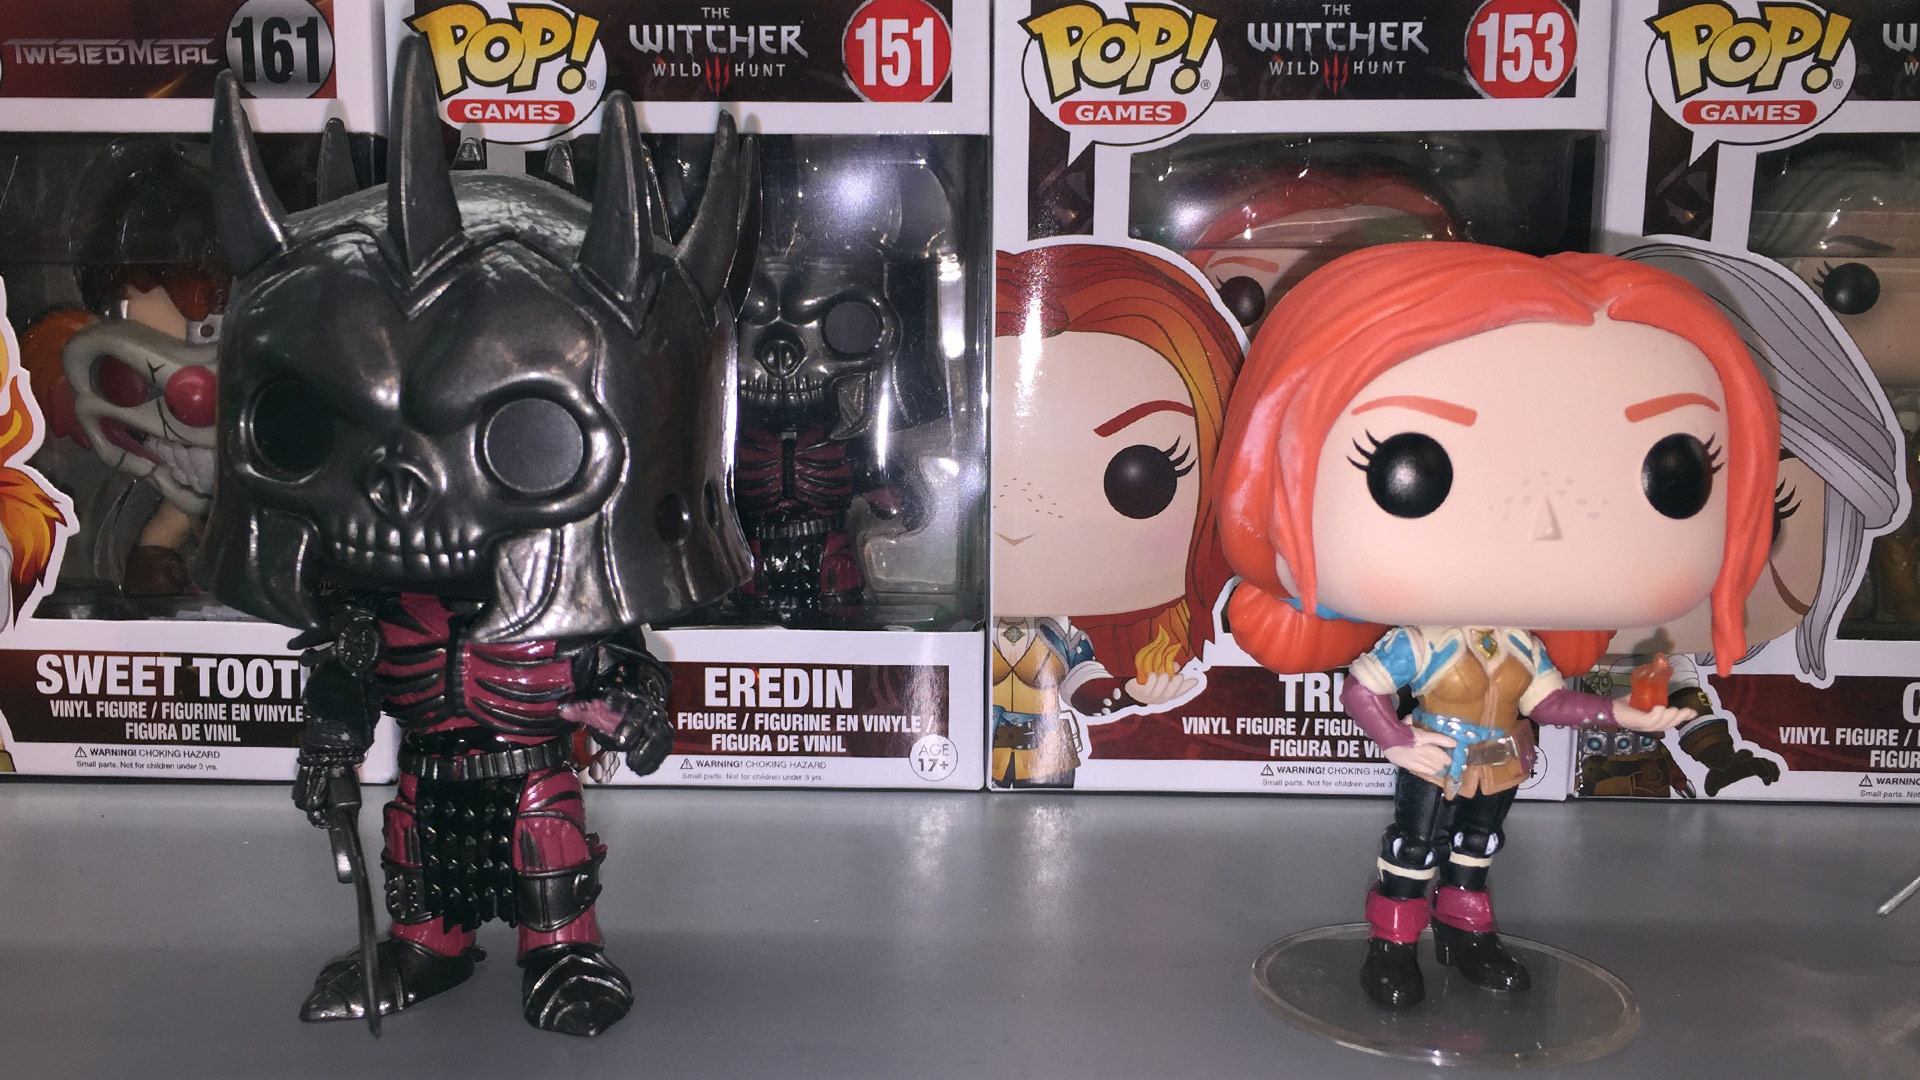 Funko Pop The Witcher with Eredin #151, Triss #153 Vinyl Figures at Toy Fair 2017